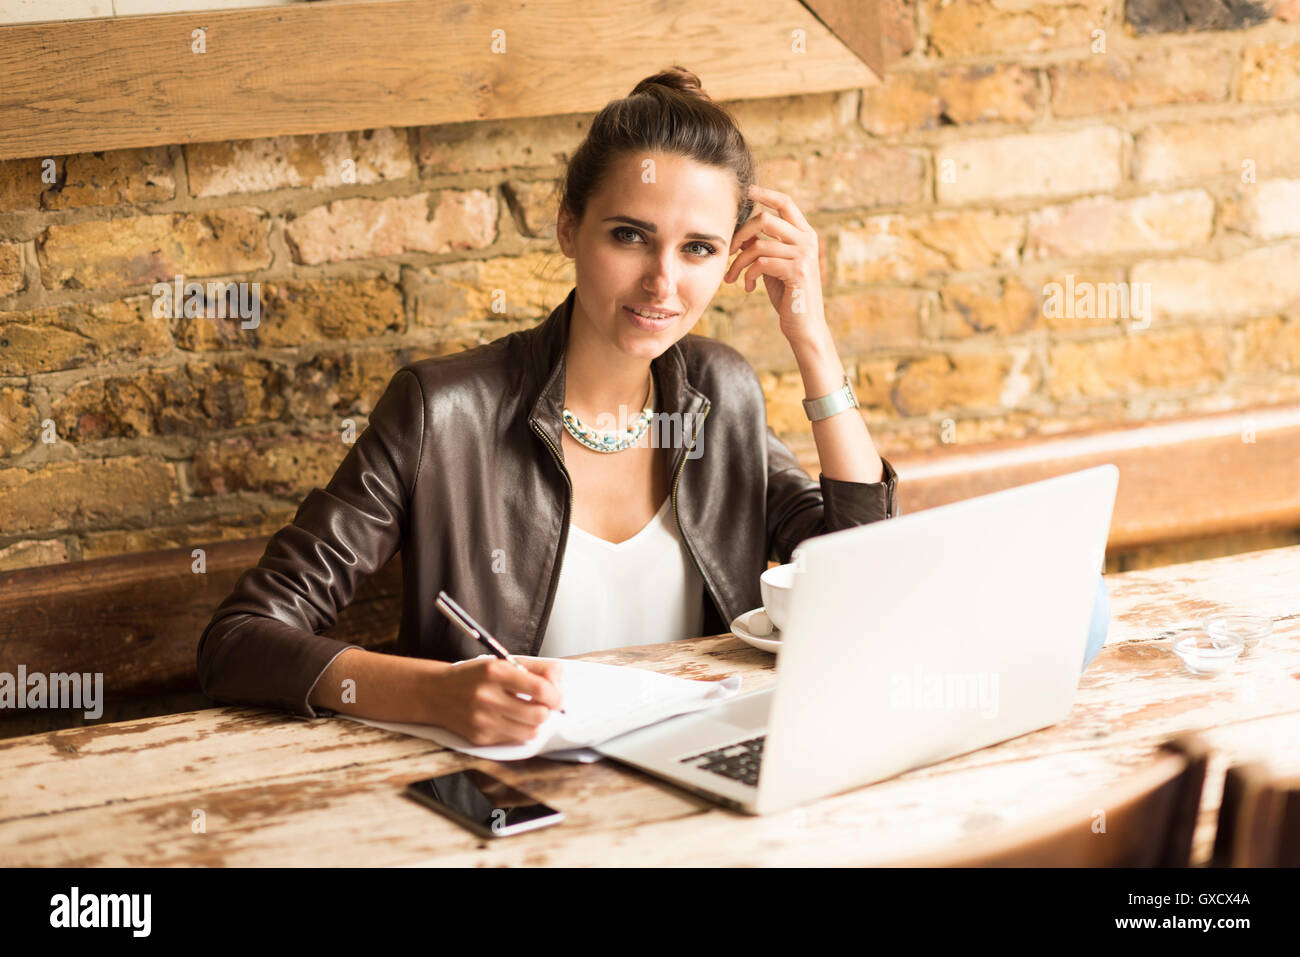 Portrait of young businesswoman making notes in cafe Banque D'Images